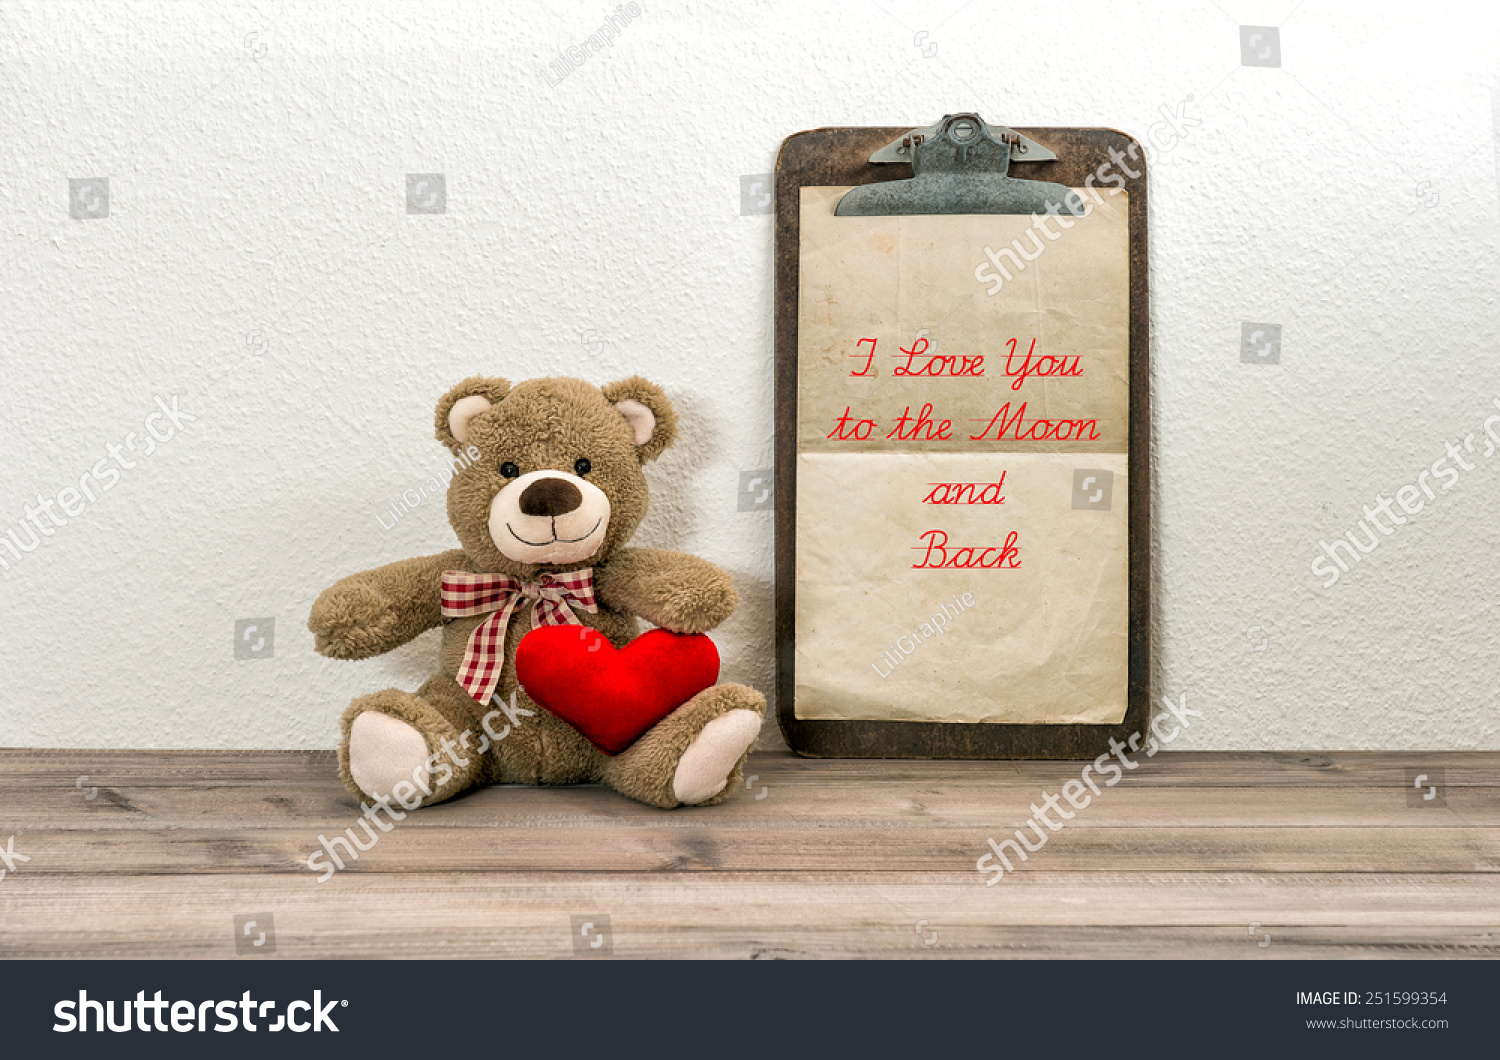 i love you to the moon and back teddy bear